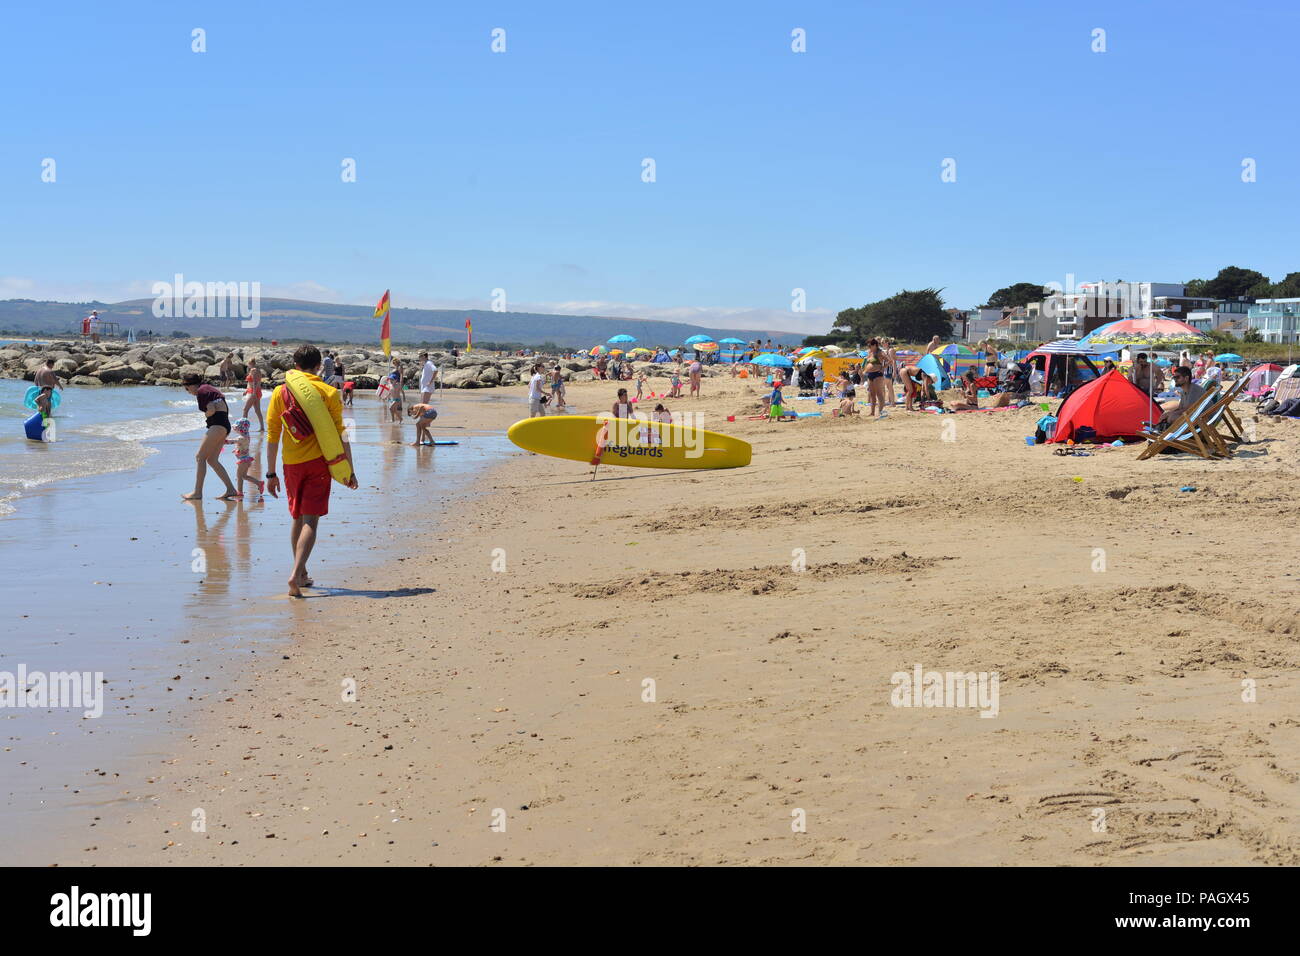 Sandbanks, Poole, Dorset, UK, 23rd July 2018, Weather: It’s hot and sunny on the beach and people are out enjoying the Mediterranean-like conditions. The glorious summer of 2018 continues in the south of England. Stock Photo